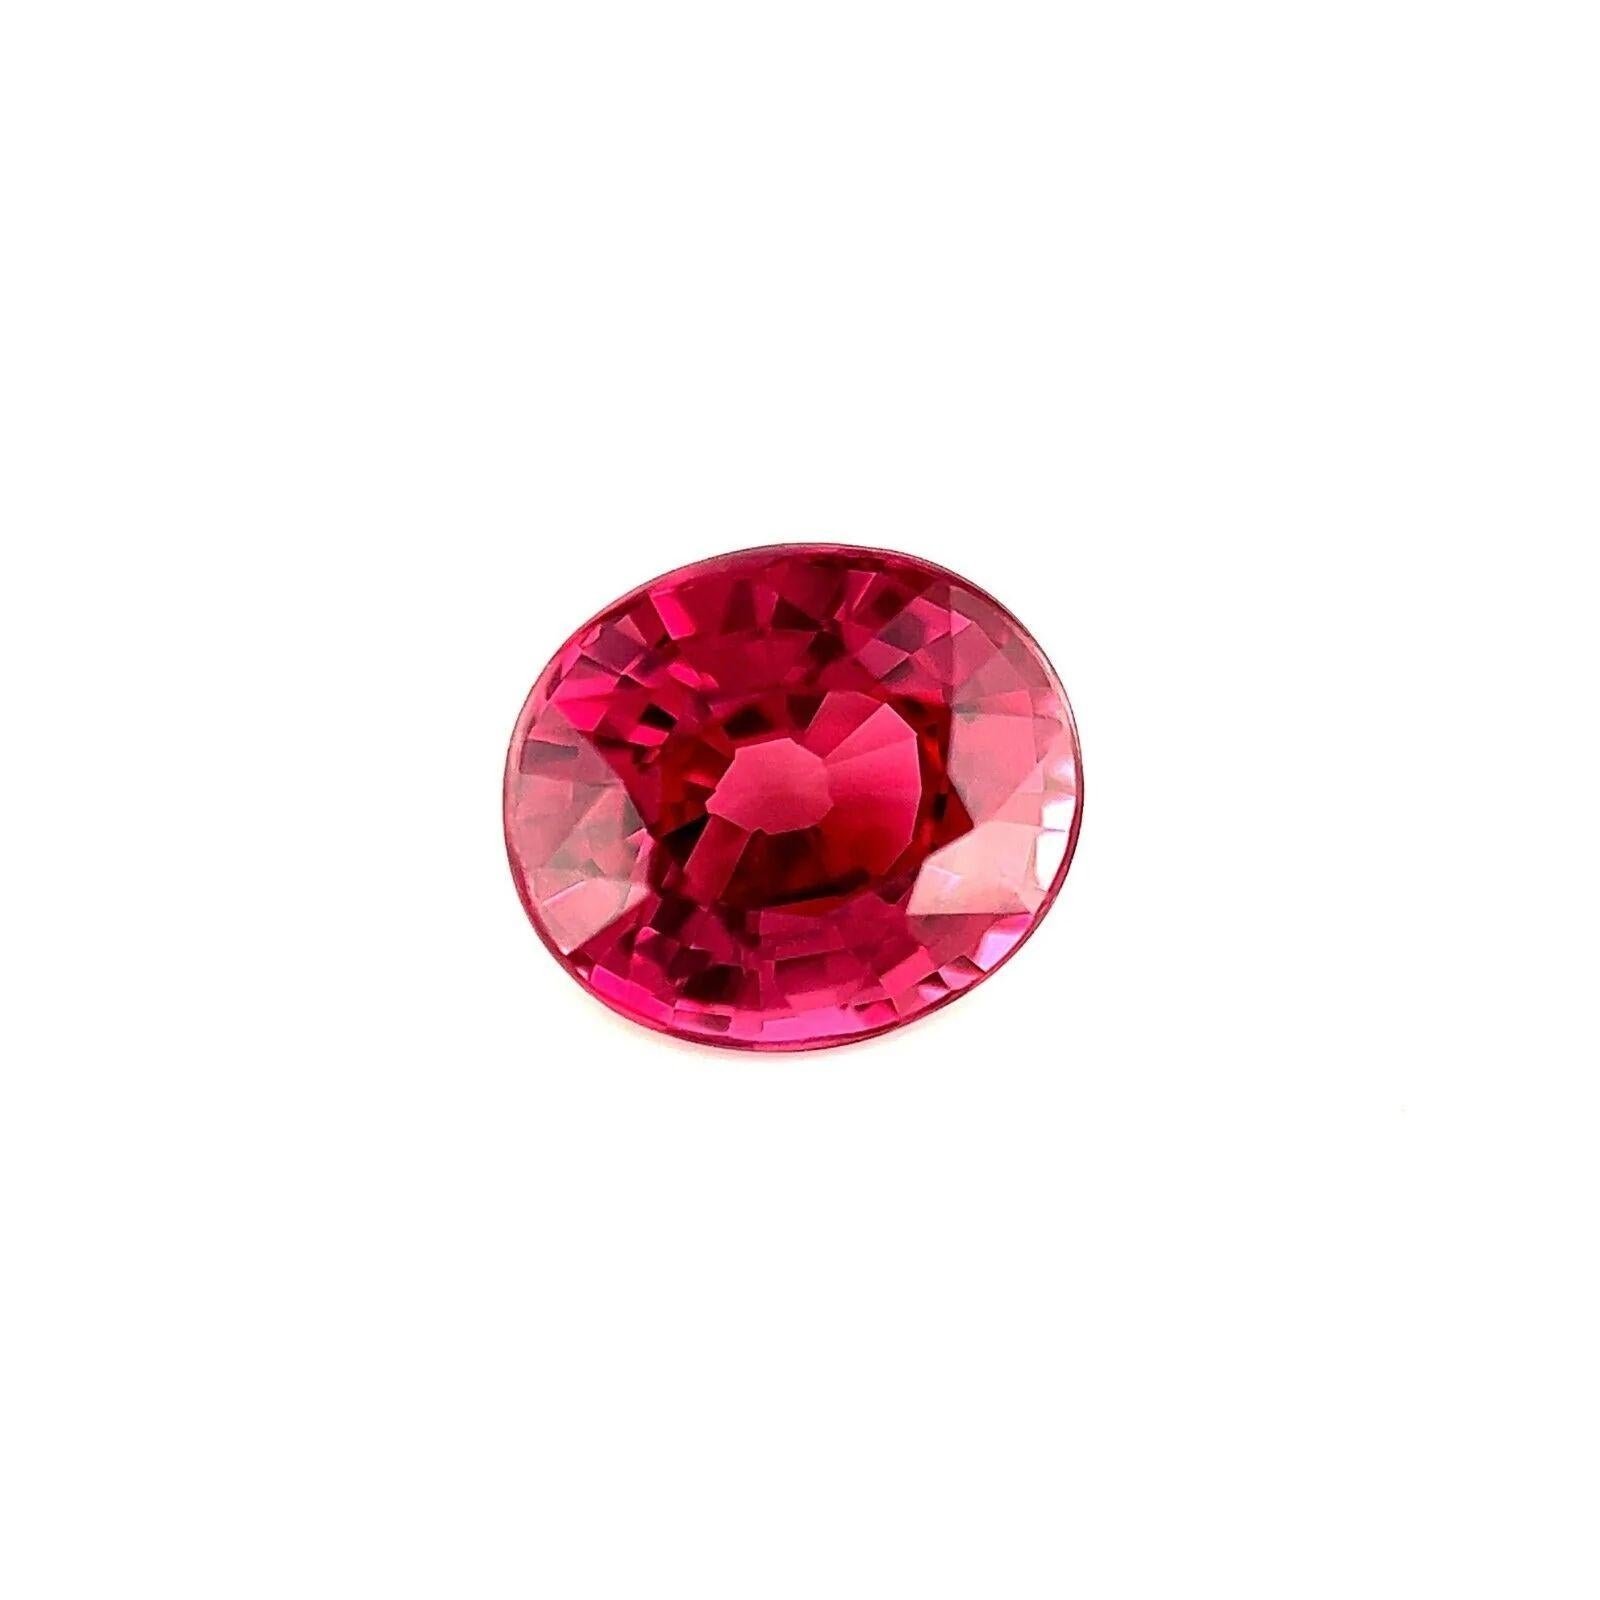 2.12ct Pink Purple Natural Rhodolite Garnet Oval Cut Loose Gem 7.7x6.7mm VVS

Fine Natural Rhodolite Garnet Gemstone.
2.12 Carat with a beautiful vivid purple pink colour and excellent clarity, very clean gem. VVS
Has an excellent oval cut with good